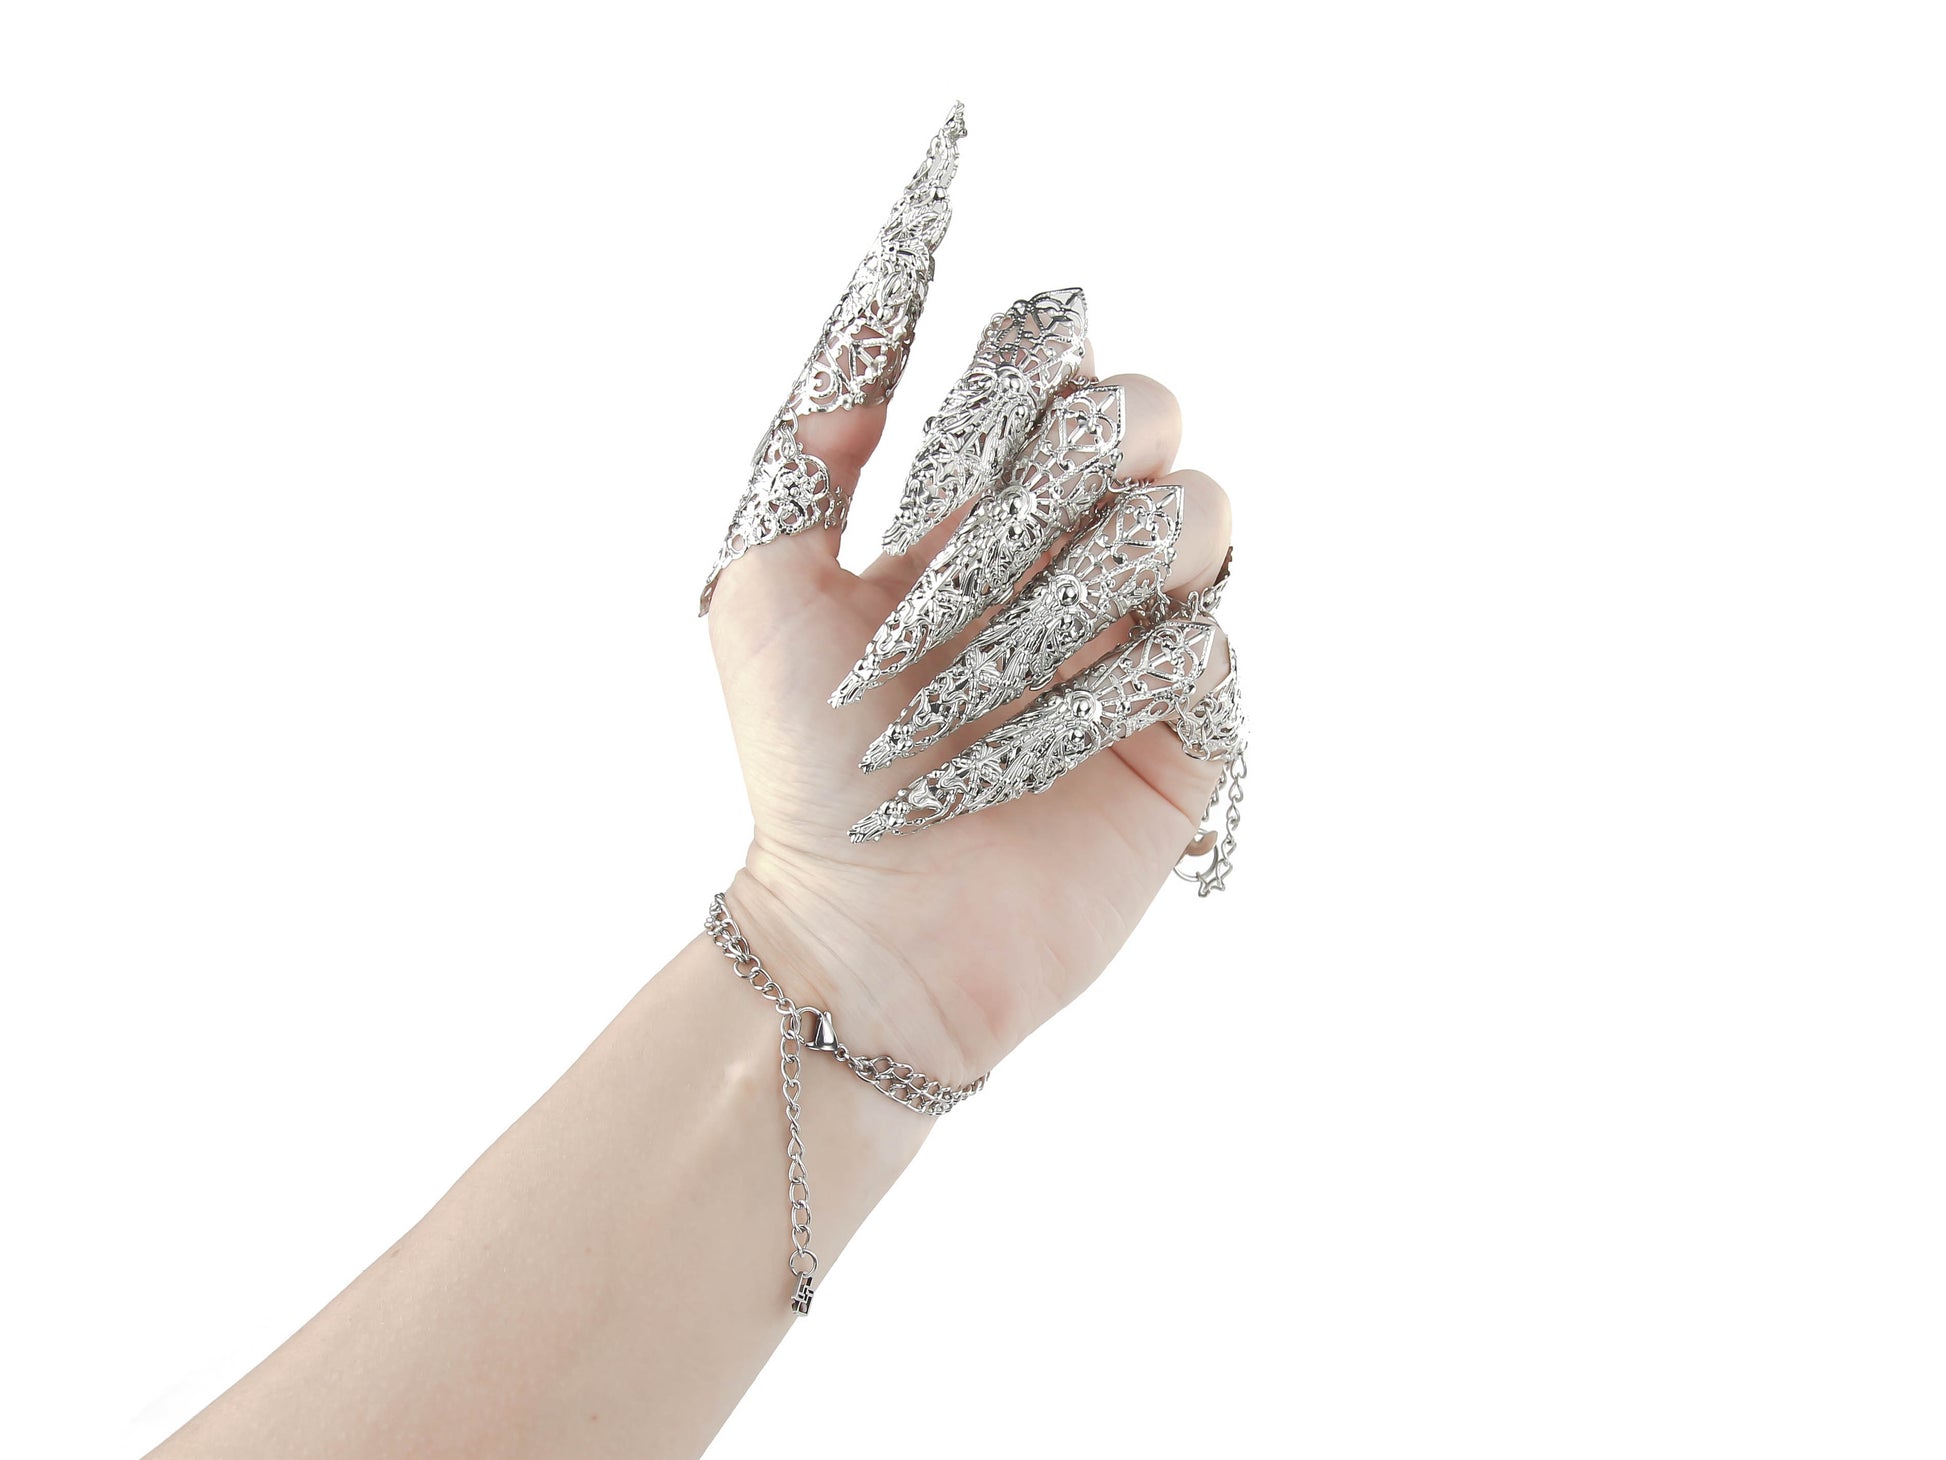 An intricate goth-style silver glove with chain-linked, claw-tipped finger claws, embodying the essence of dark fashion. The elaborate gothic jewelry piece is perfect for adding a dramatic touch to any ensemble, reflecting a sophisticated yet edgy aesthetic.